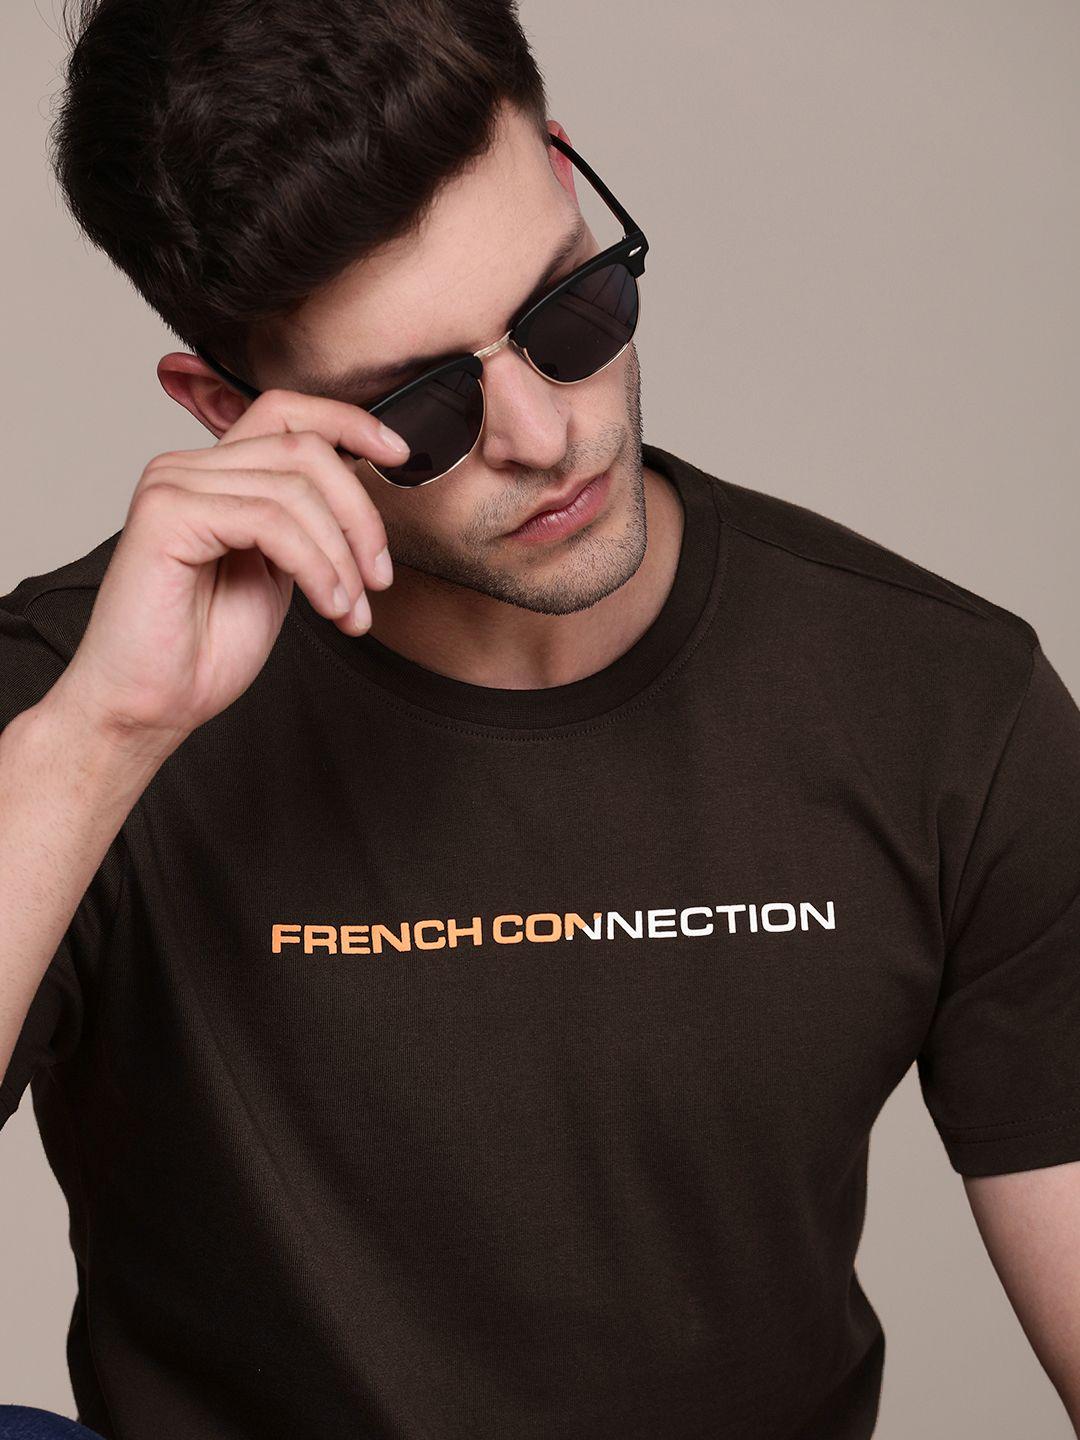 french connection brand logo printed pure cotton t-shirt